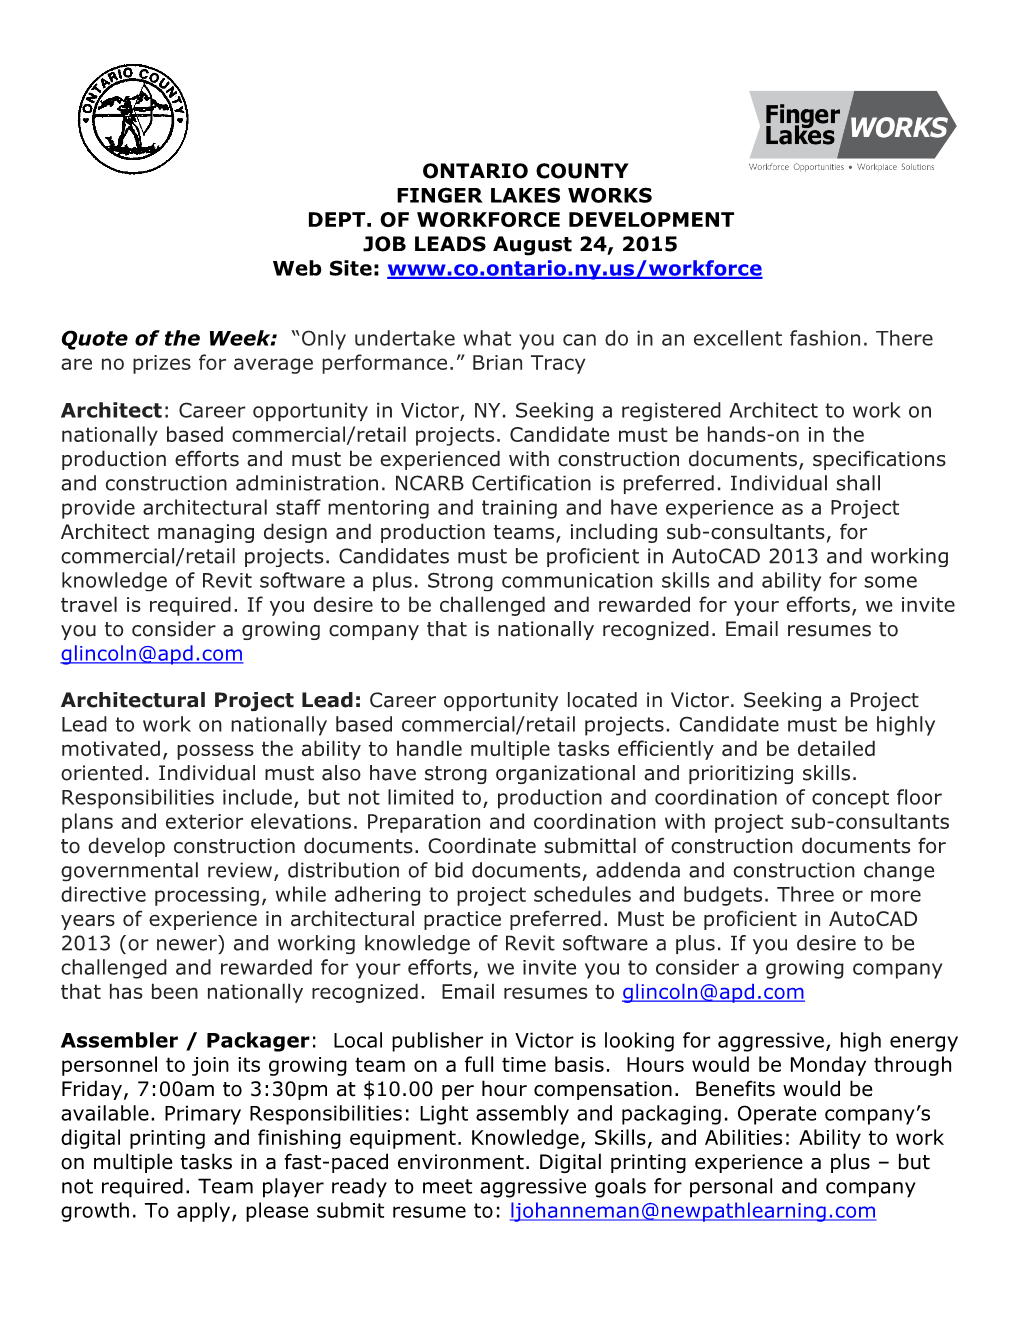 ONTARIO COUNTY FINGER LAKES WORKS DEPT. of WORKFORCE DEVELOPMENT JOB LEADS August 24, 2015 Web Site